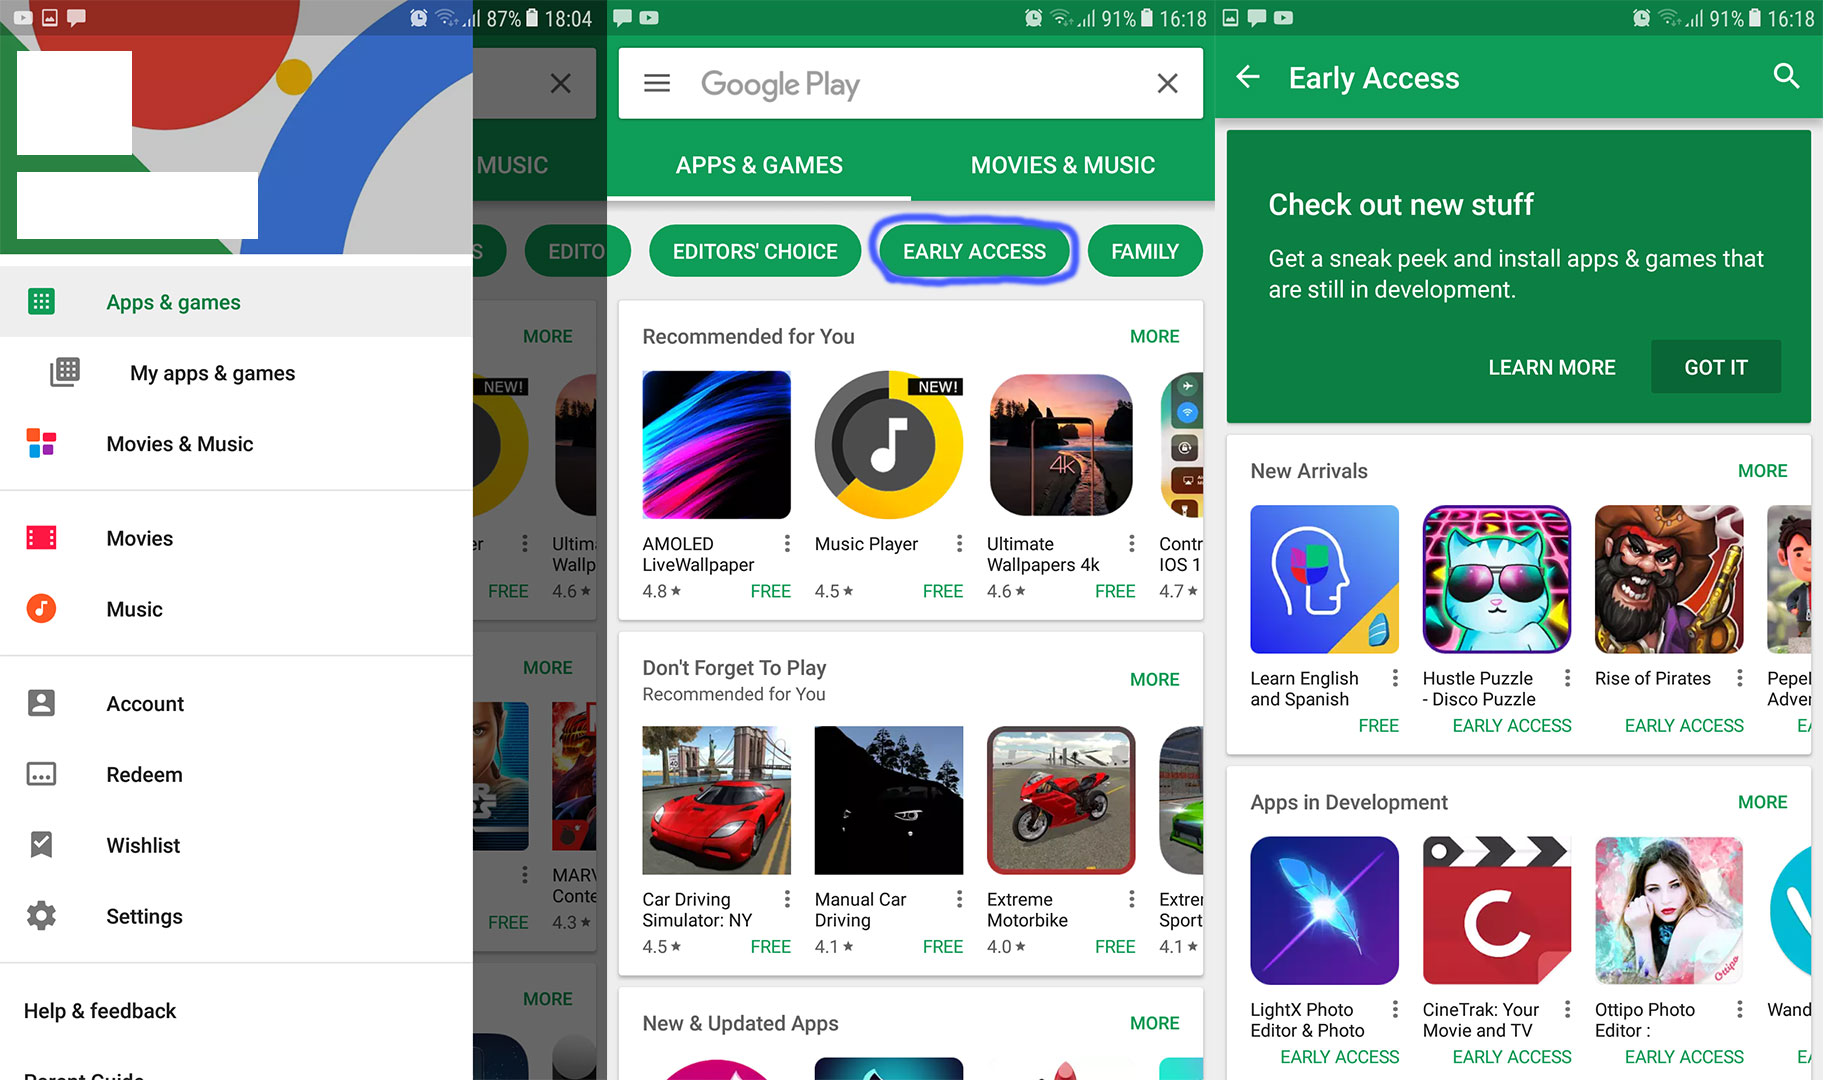 How to Participate in Android App Beta Programs on Google Play